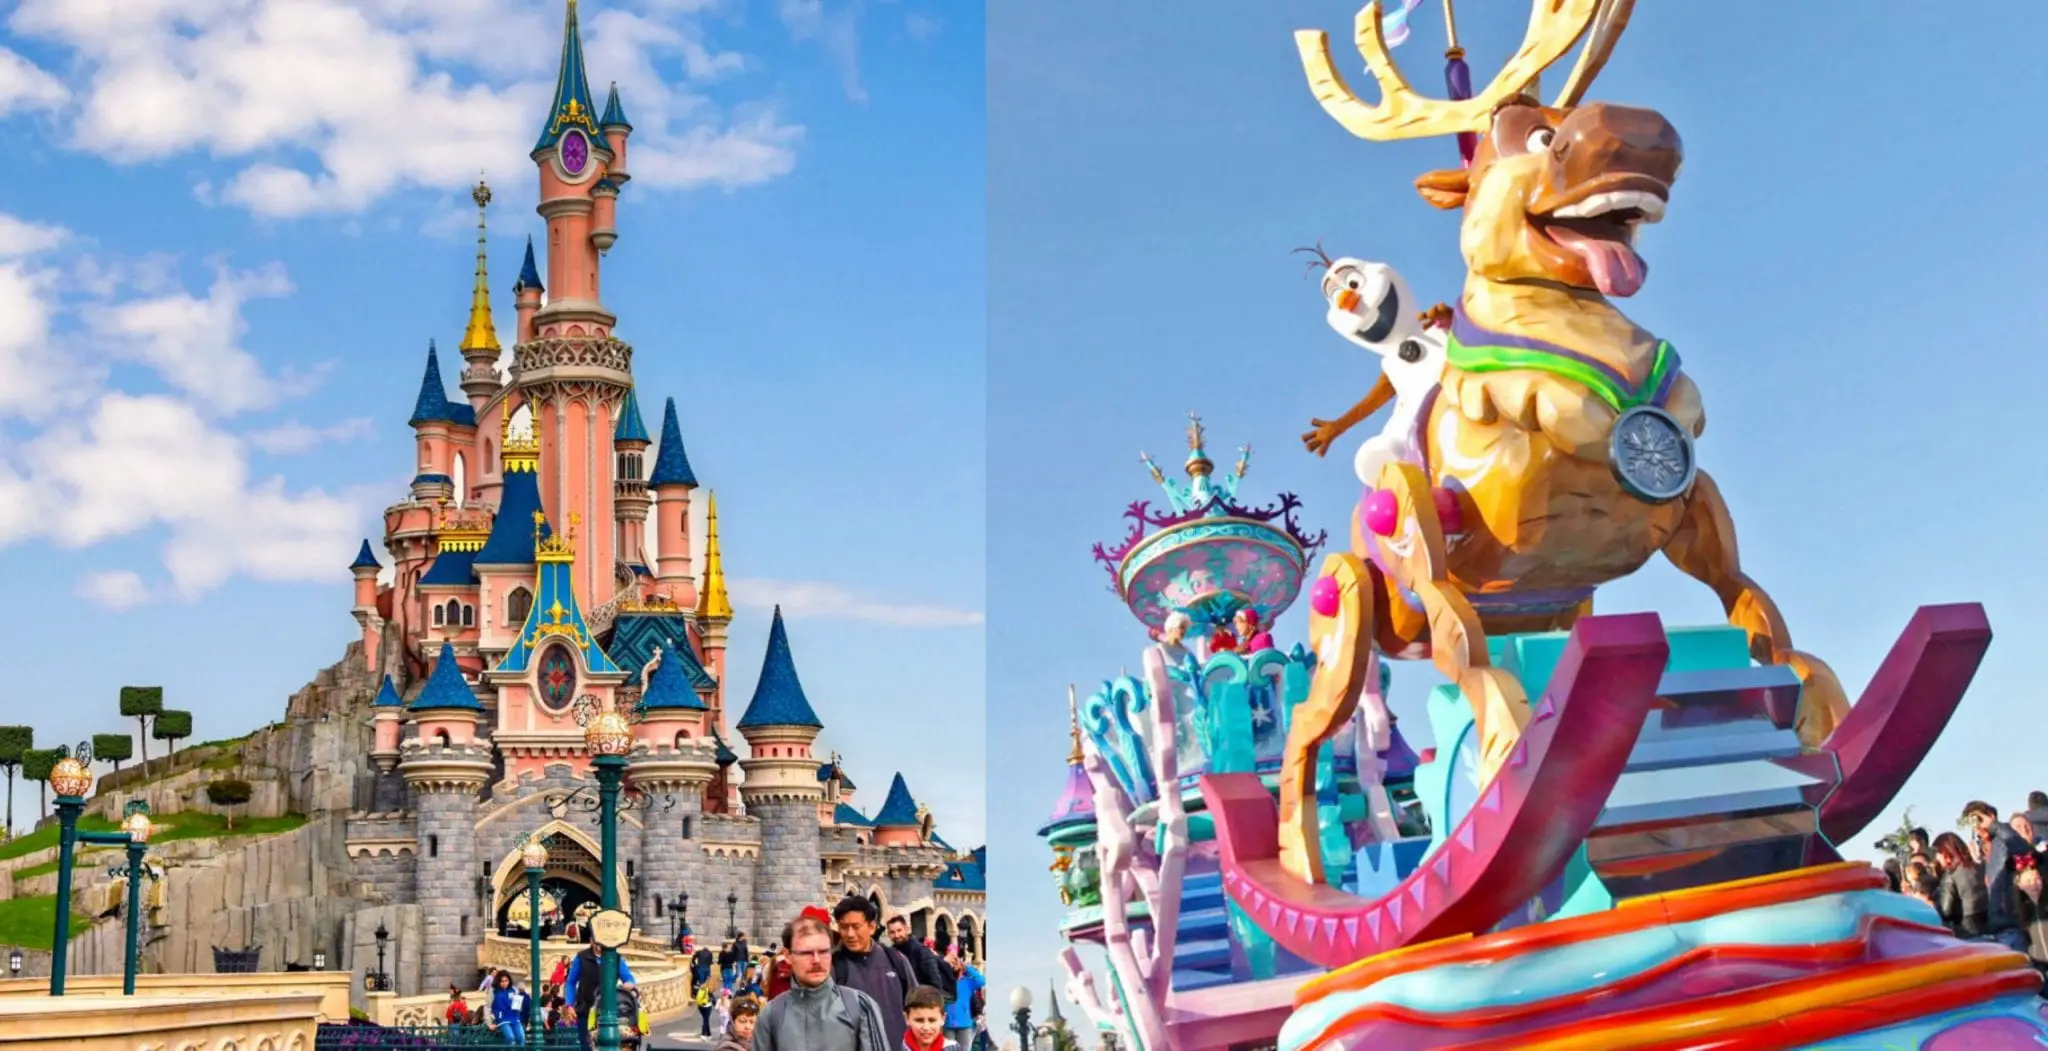 Disneyland Paris Will Soon Be To Land Filled With Ice!